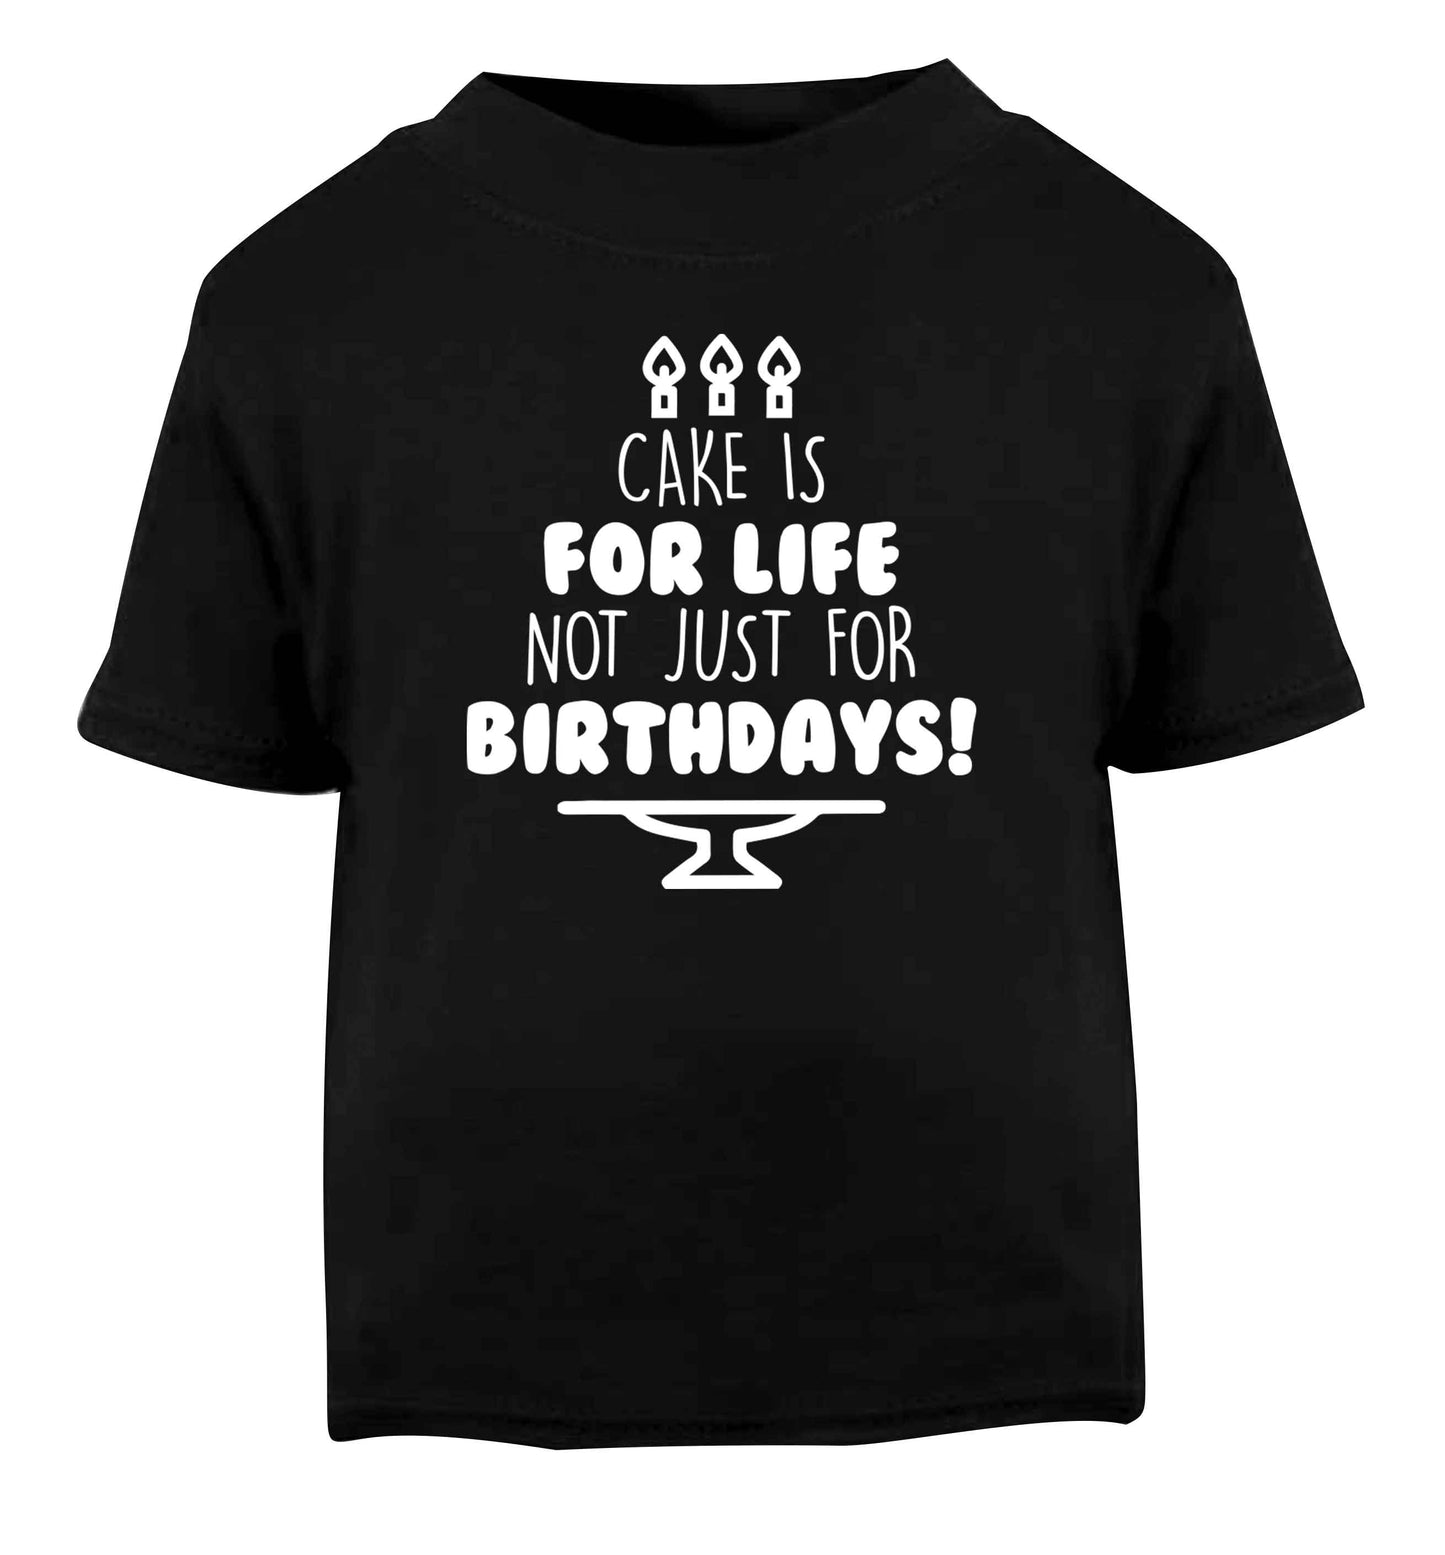 Cake is for life not just for birthdays Black Baby Toddler Tshirt 2 years